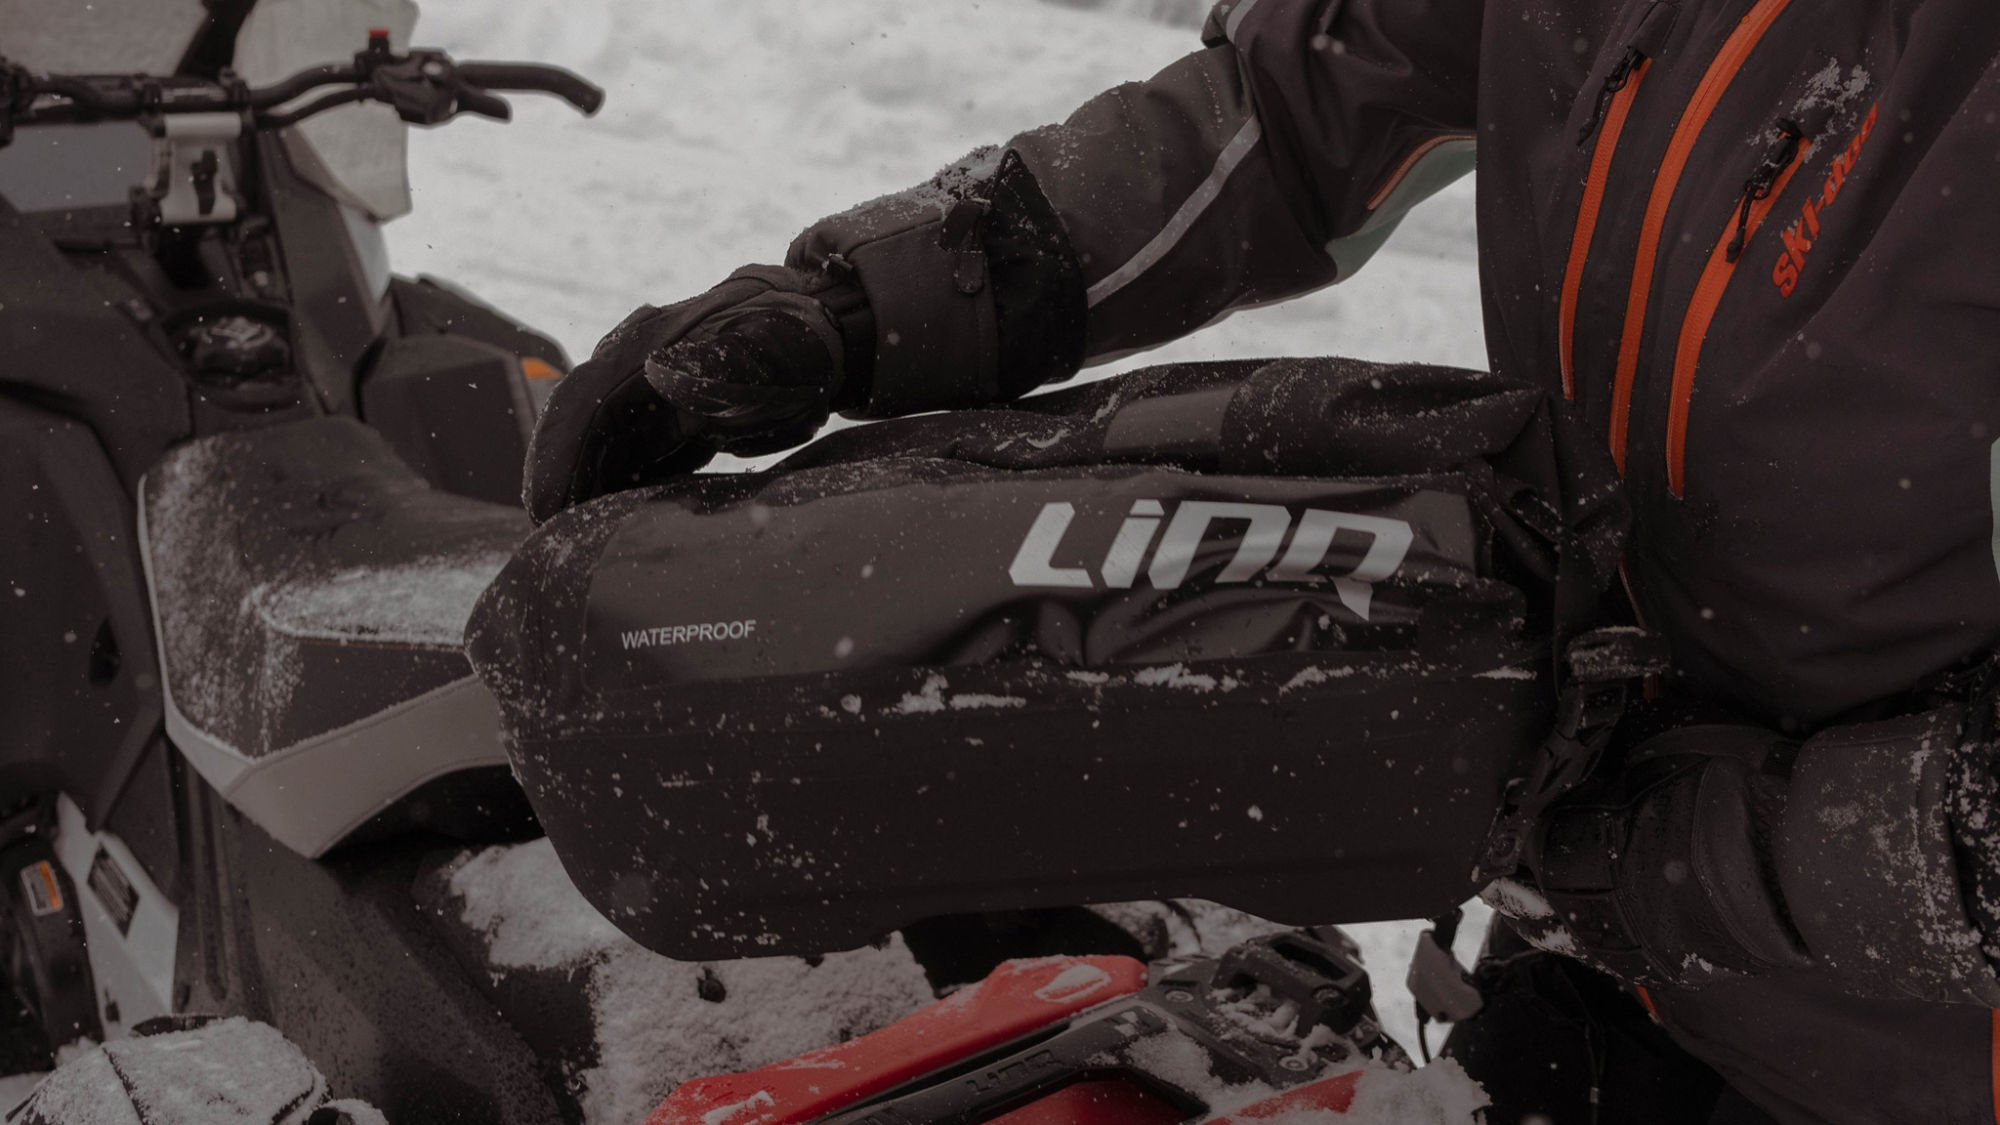 LinQ waterproof bag about to be installed on a 2025 Ski-Doo Renegade snowmobile